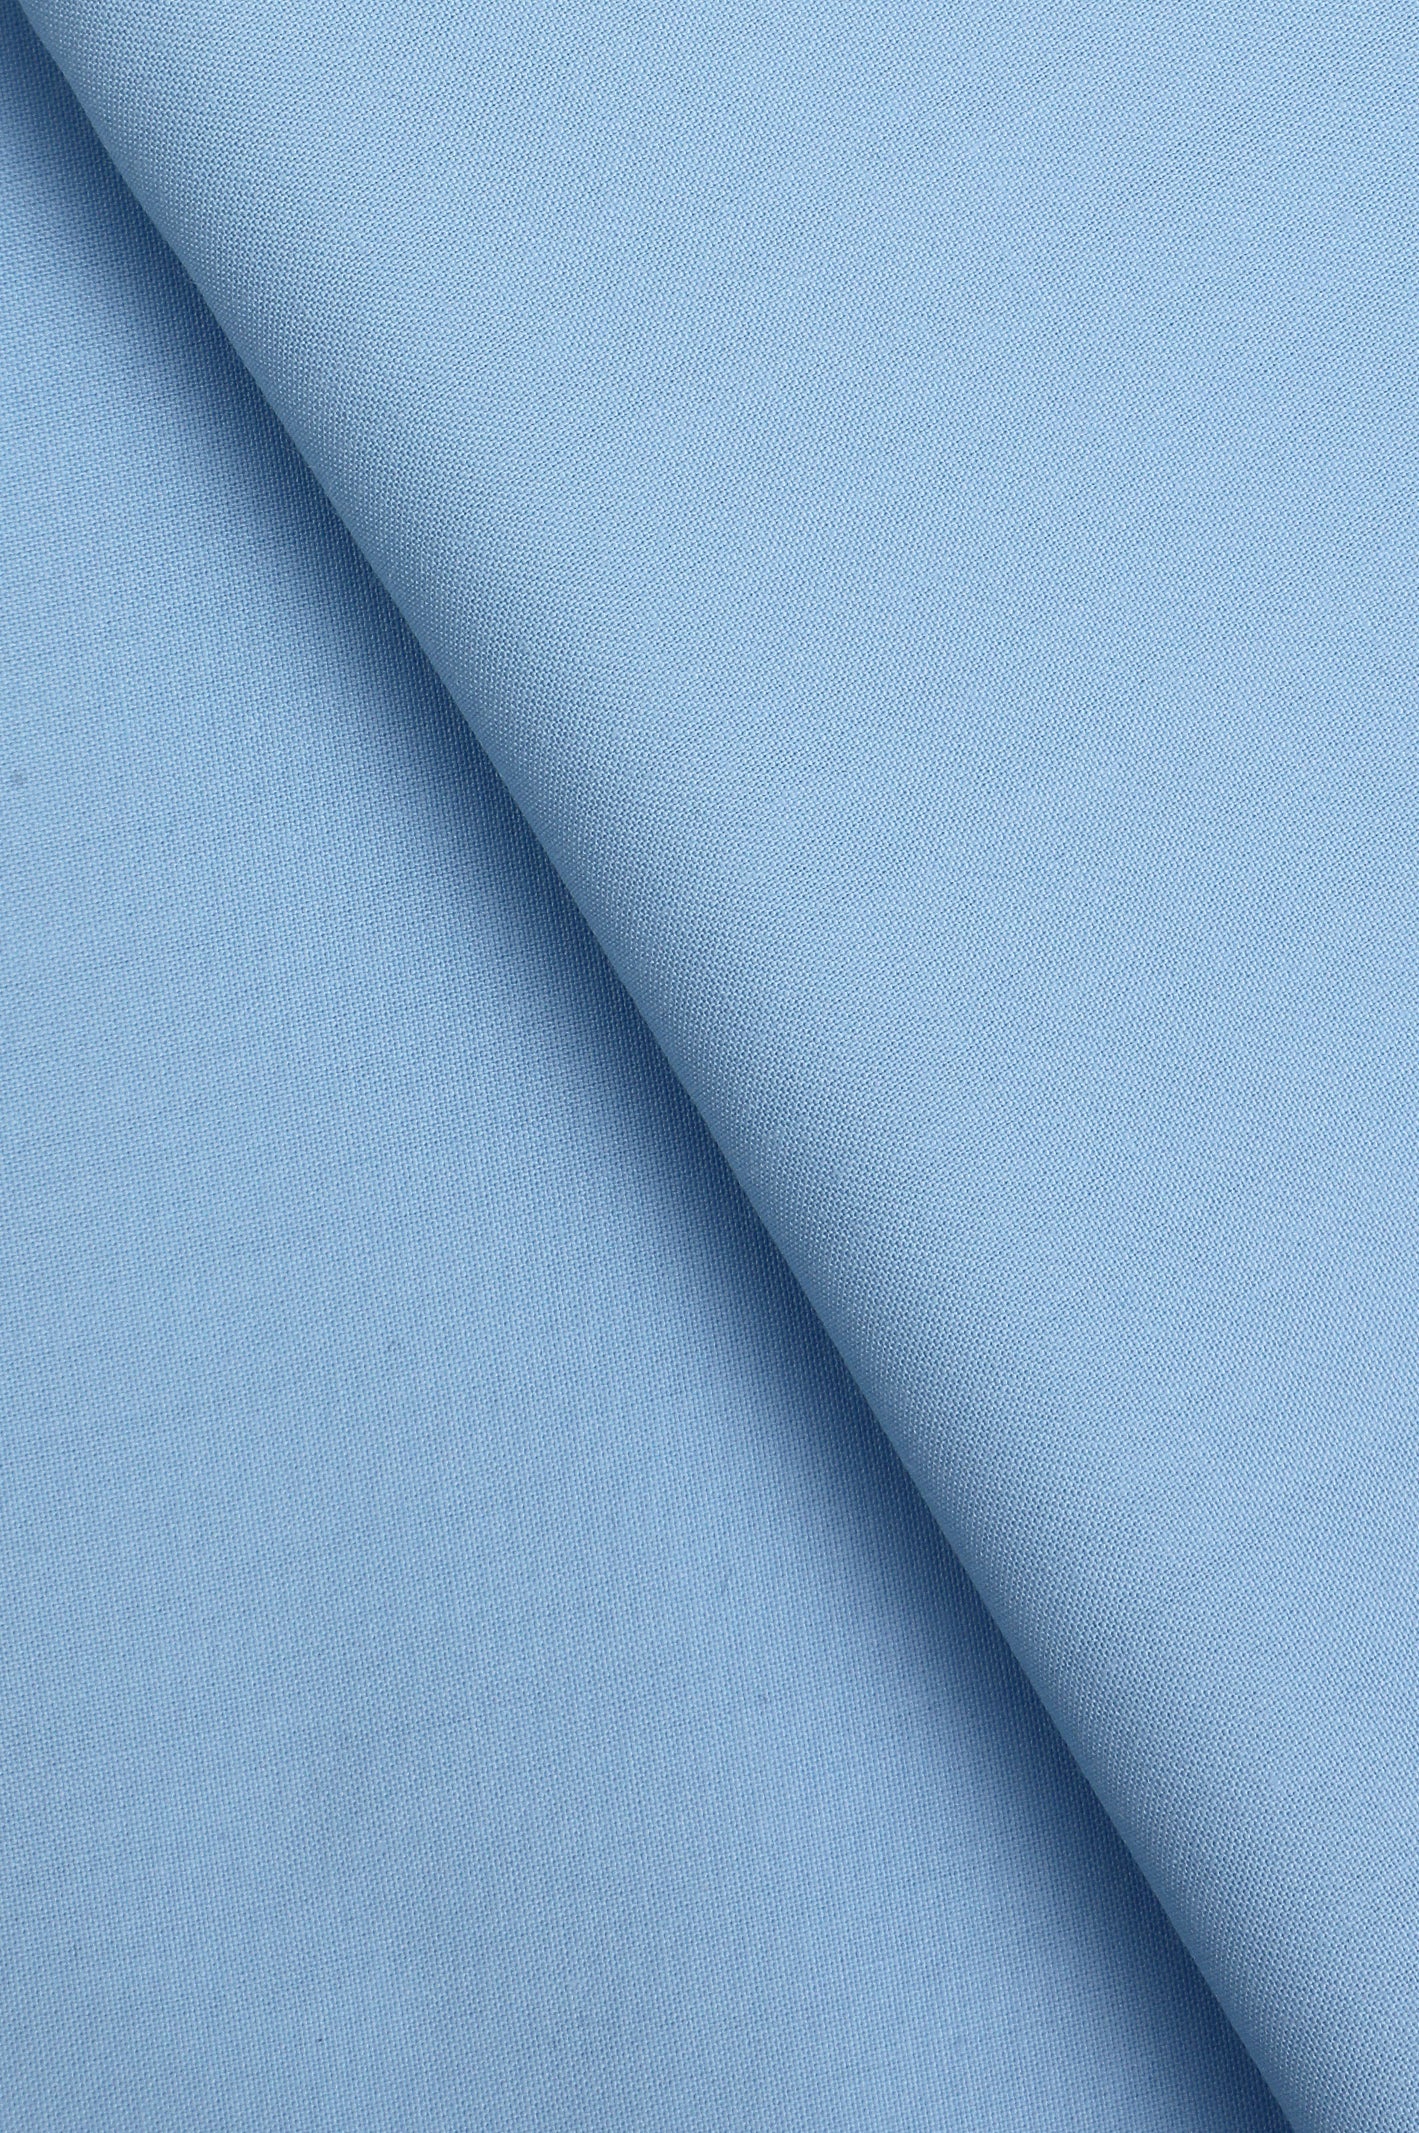 Wash & Wear Unstitched Fabric for Men SKU: US0188-SKYBLUE - Diners